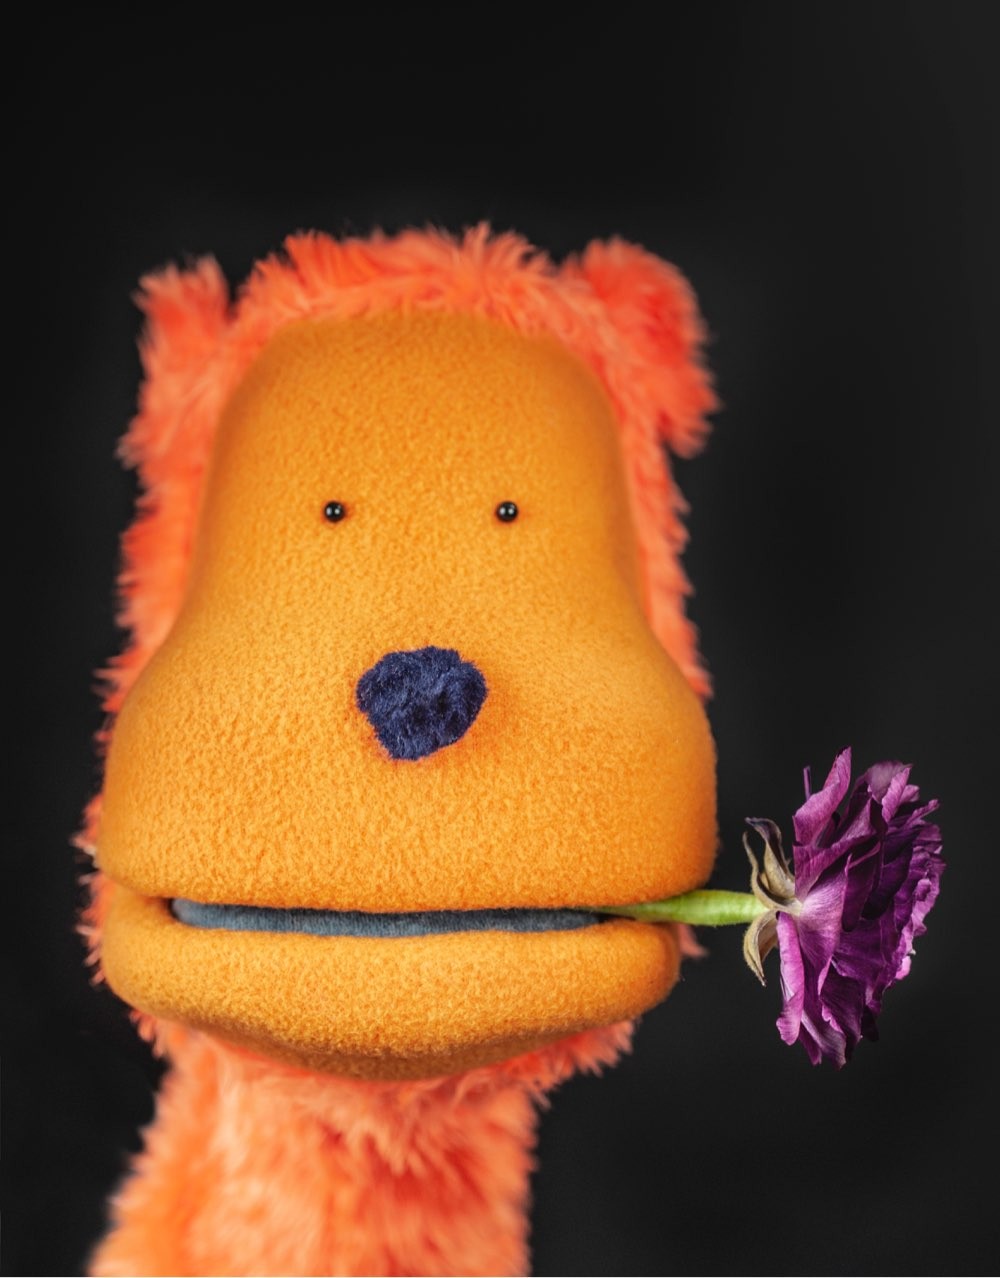 The orange puppet <q>Crisis Advisor</q> with a flower in his mouth.